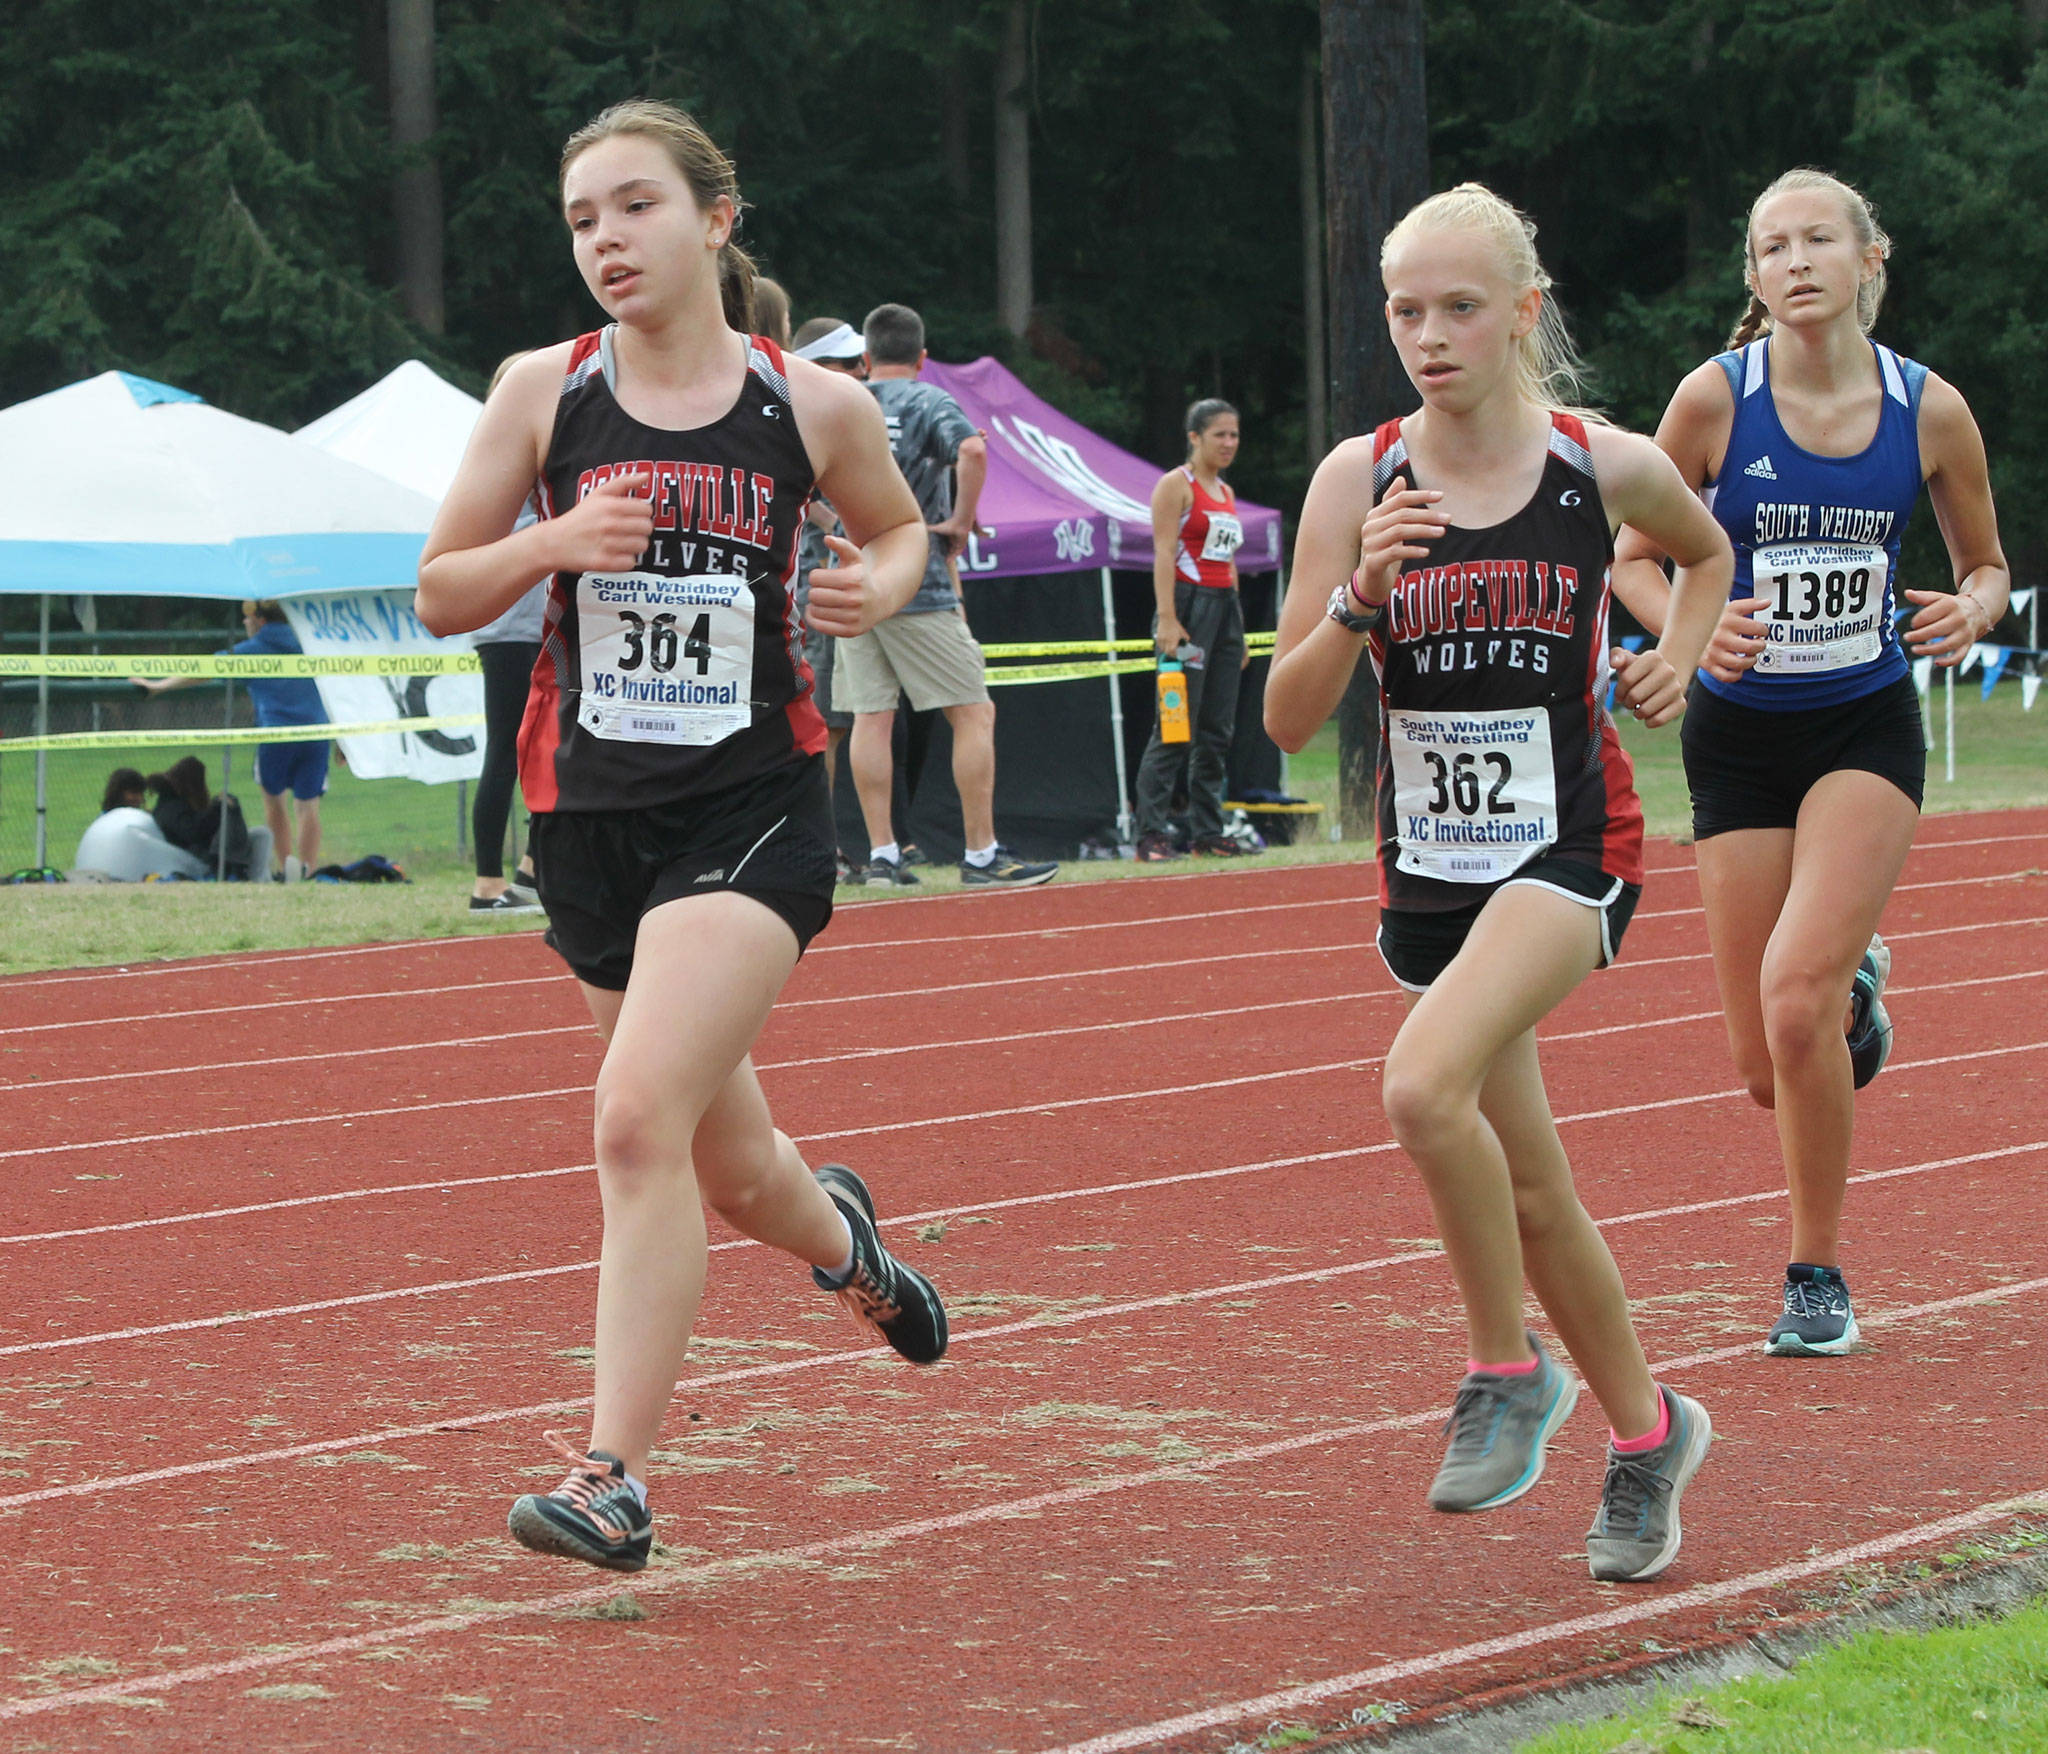 Alana Mihill and Claire Mayne pick up the pace as they run the final 200 meters.(Photo by Jim Waller/Whidbey News-Times)